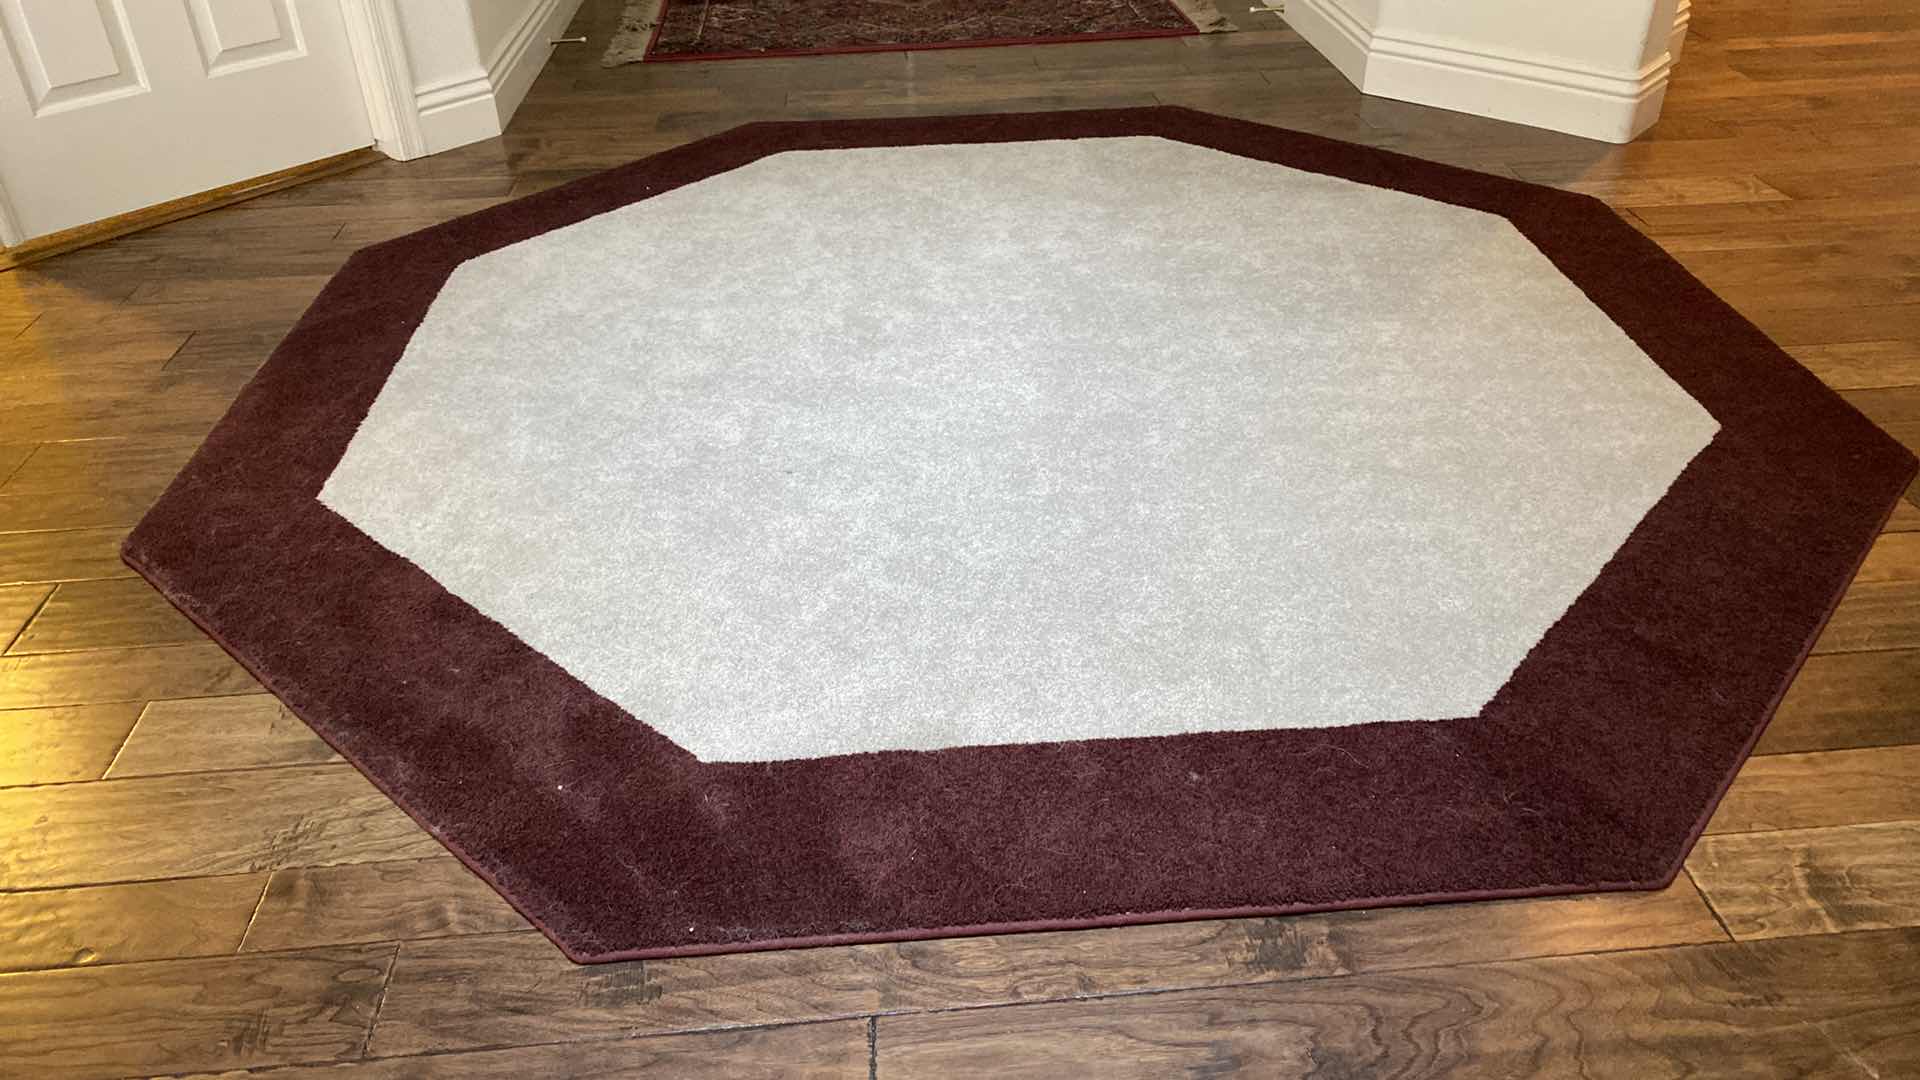 Photo 1 of CUSTOM AREA PLUSH RUG WITH ATTACHED FELT BACKING BURGUNDY AND CREAM 8’ X 8’